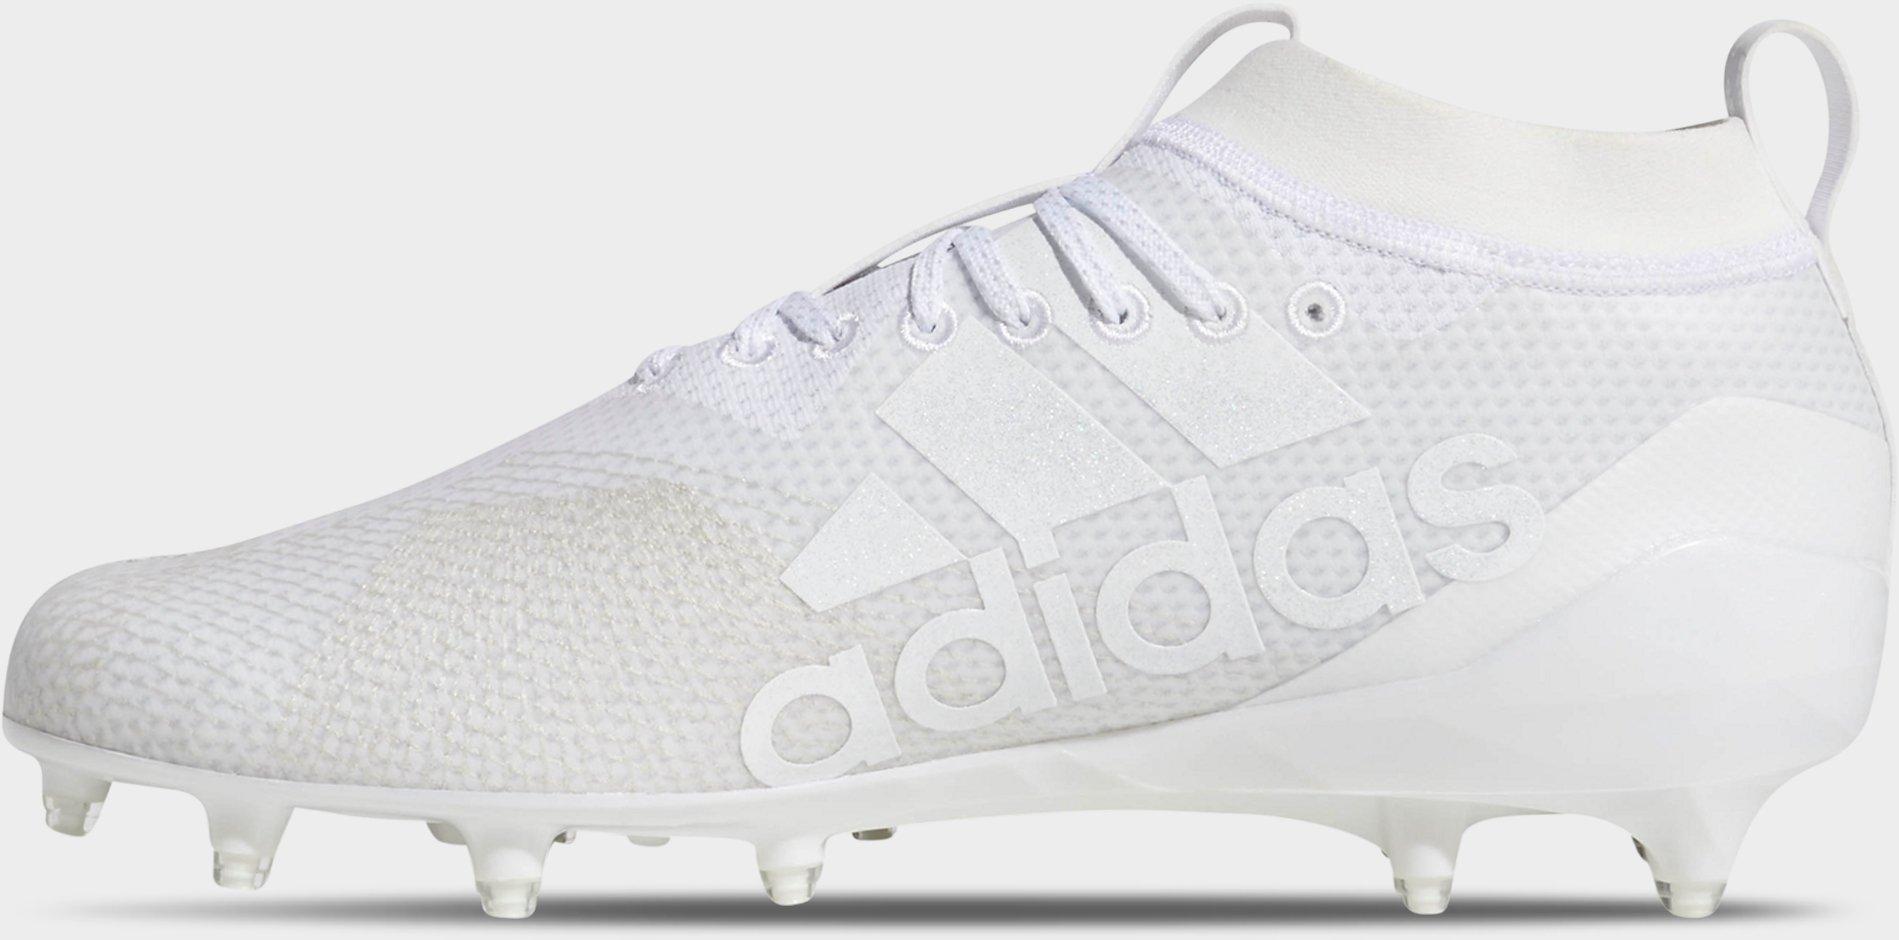 all white adidas cleats football